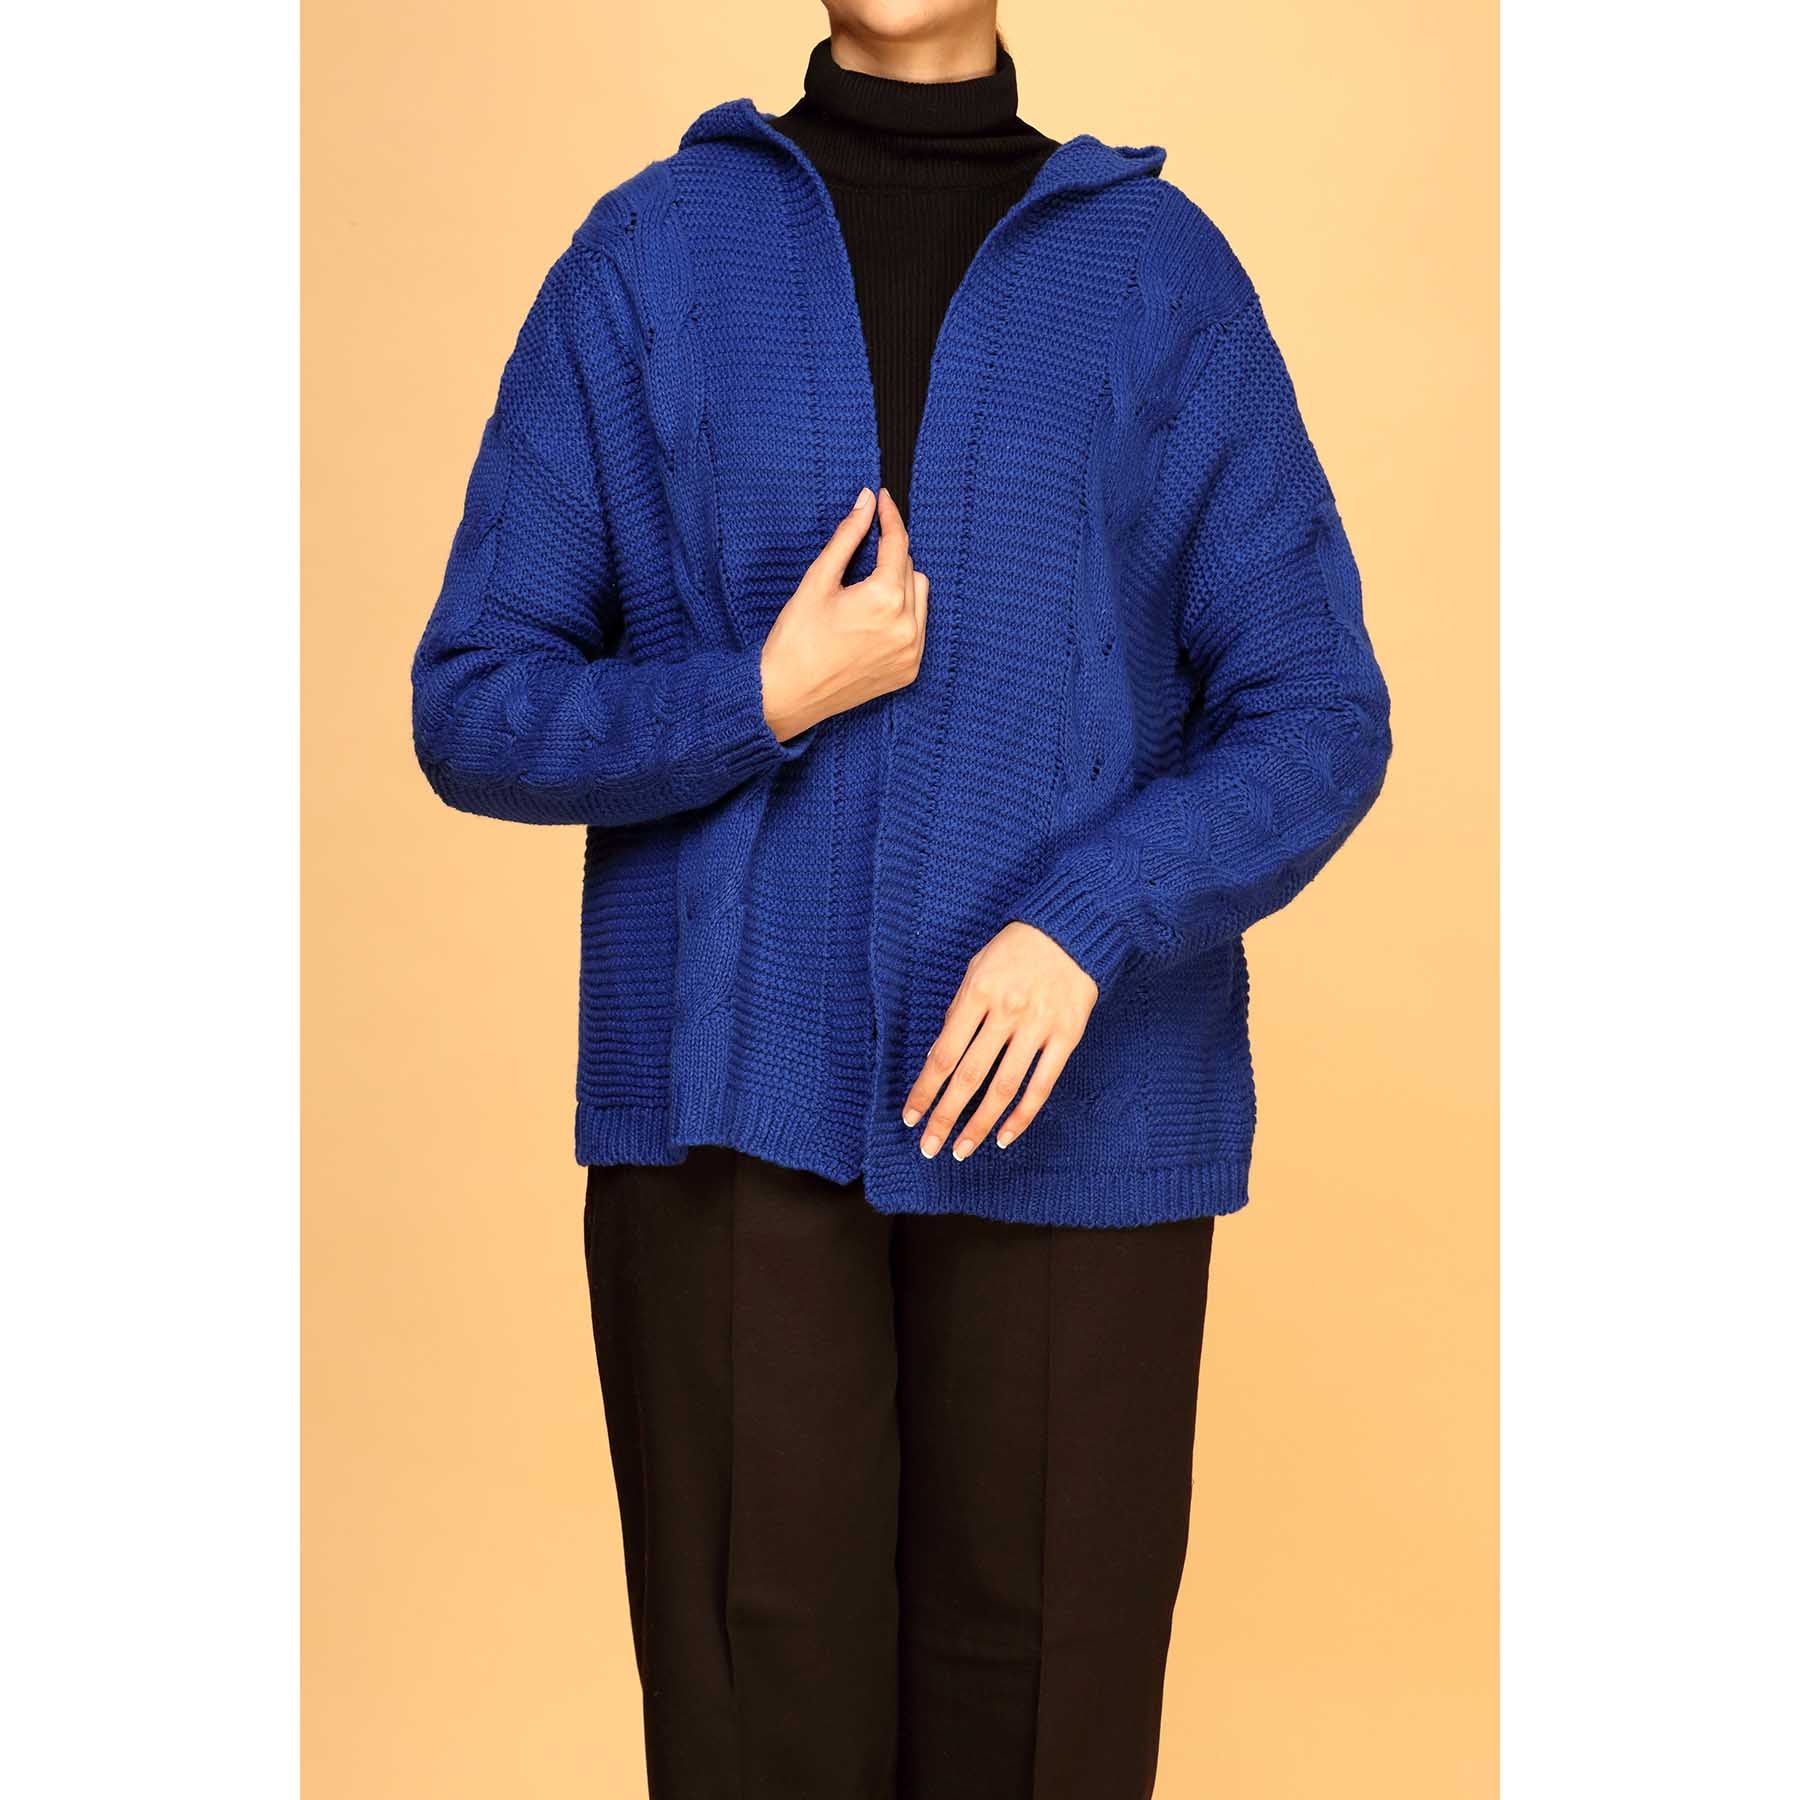 Blue Color Hooded Cardigan PW1917